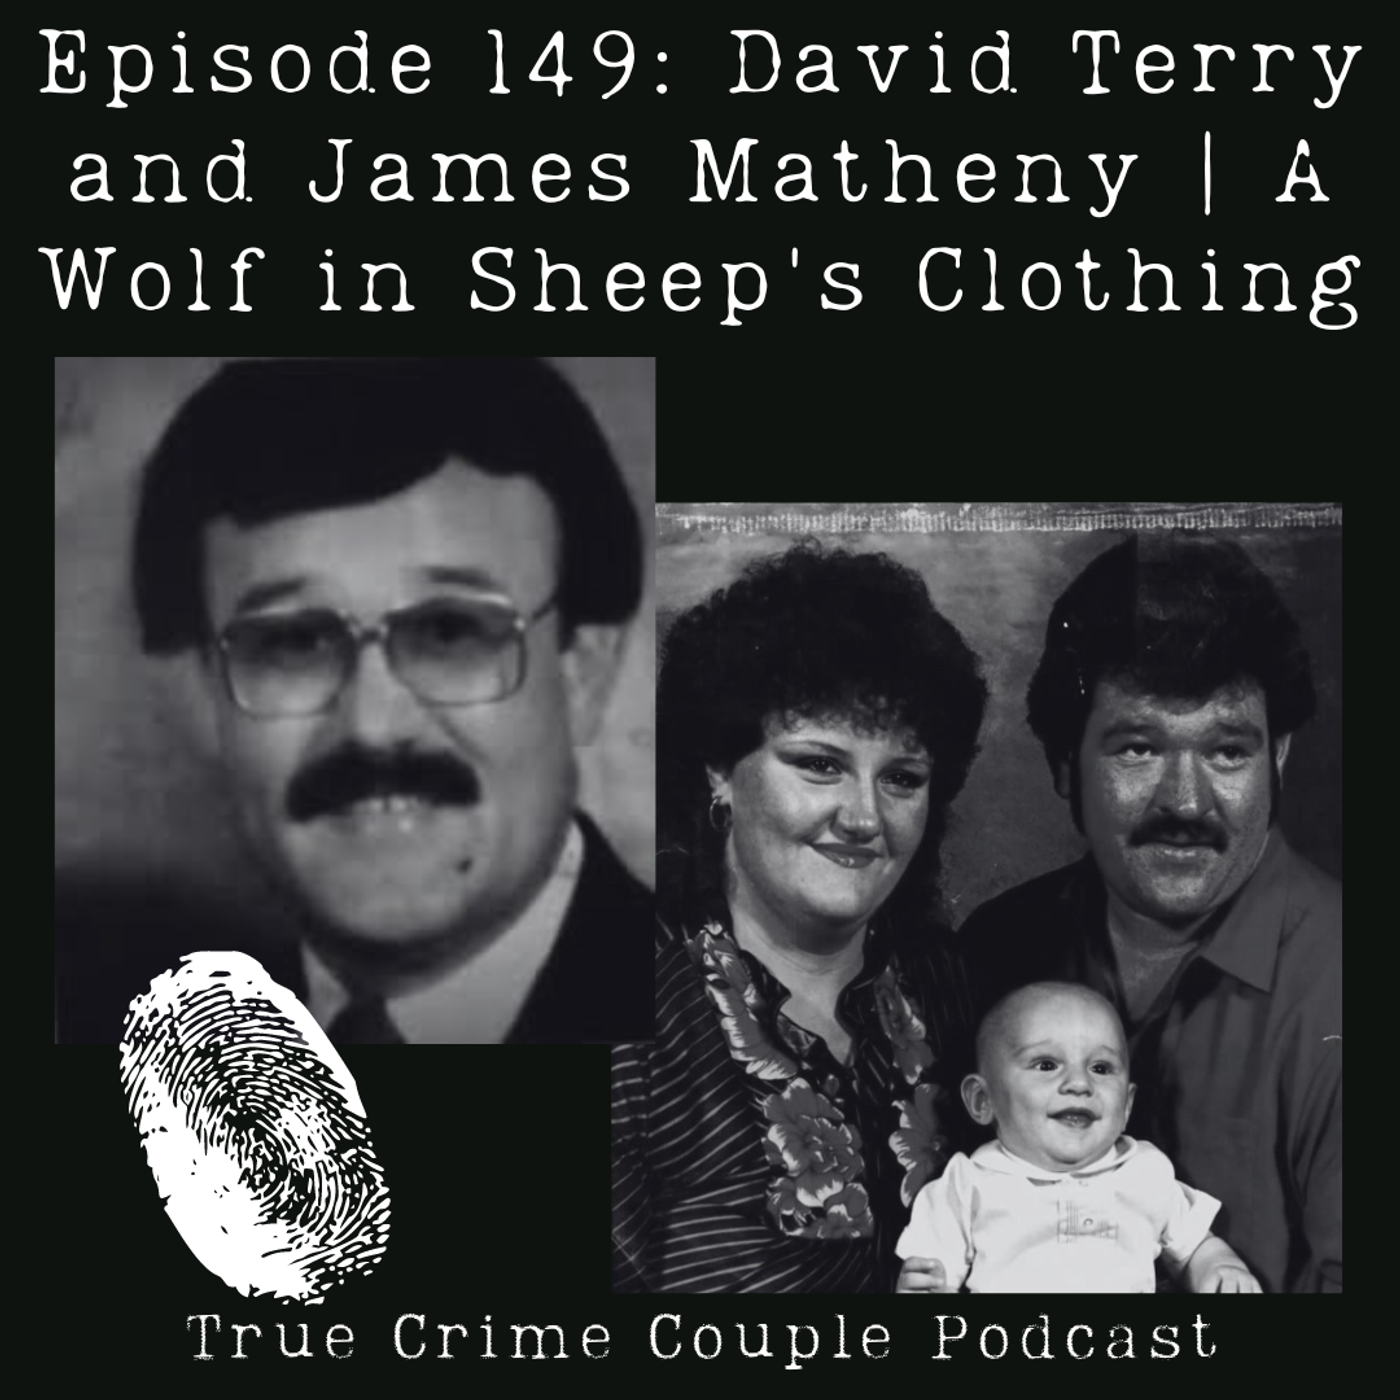 Episode 149: David Terry and James Matheny | A Wolf in Sheep’s Clothing